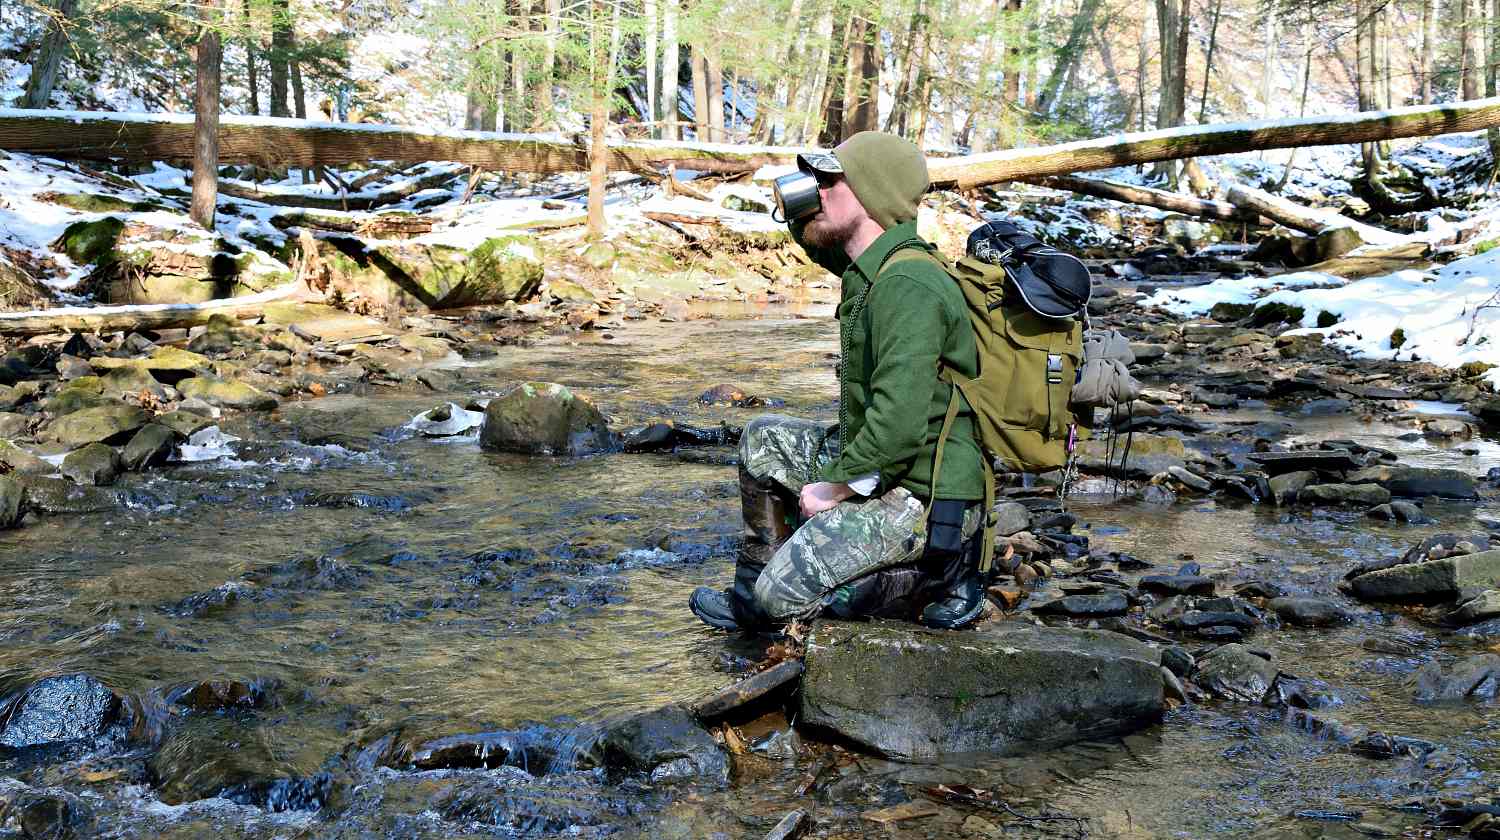 Man along a mountain stream in the forest | Outdoor Survival Skills For The True Outdoorsman | Featured